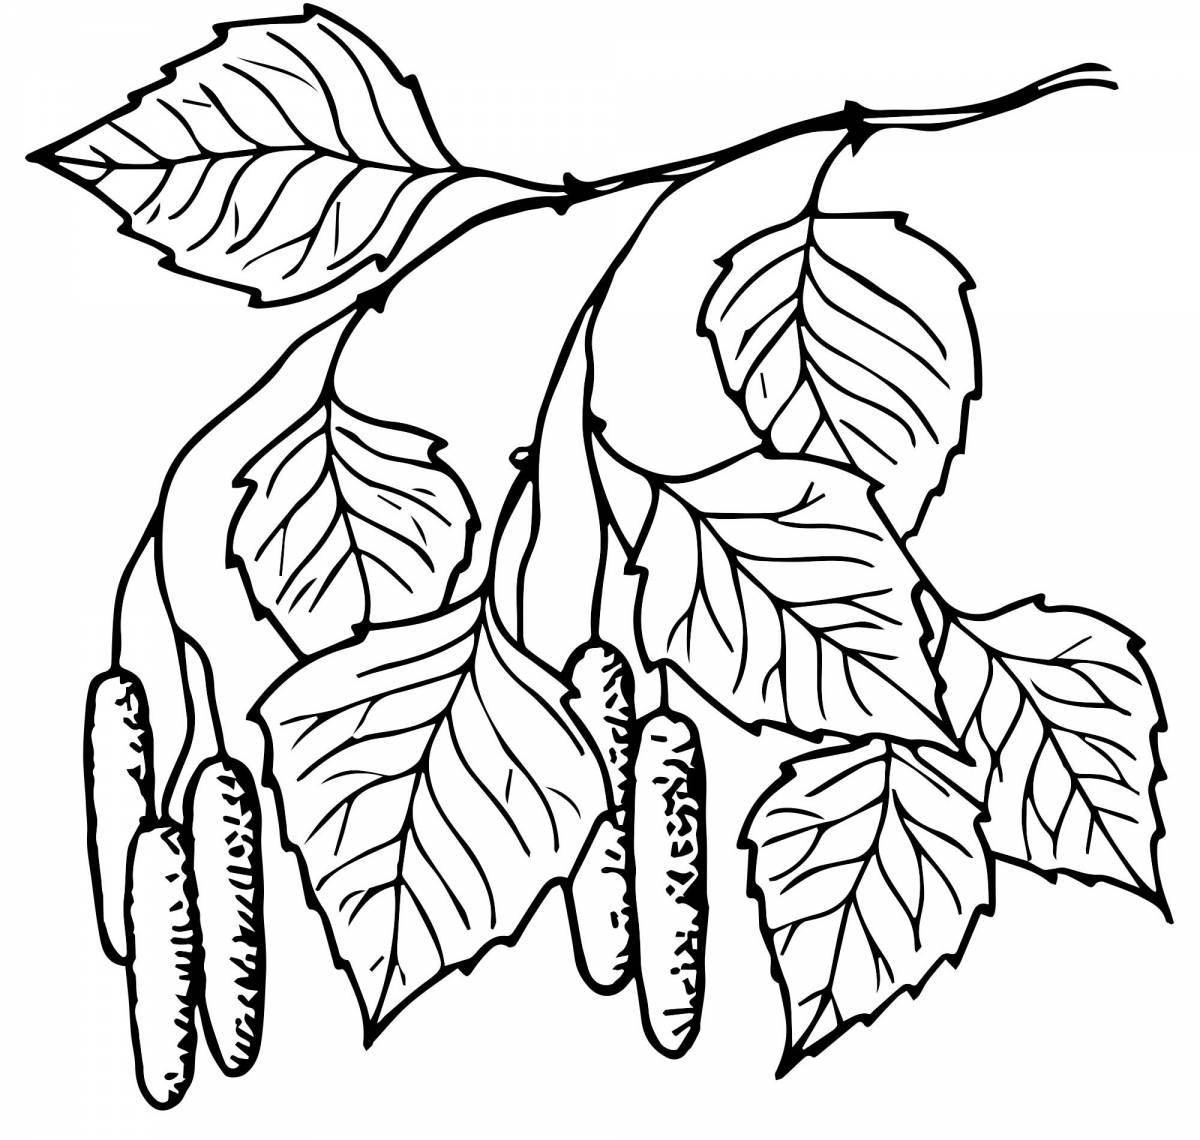 Coloring book gorgeous birch